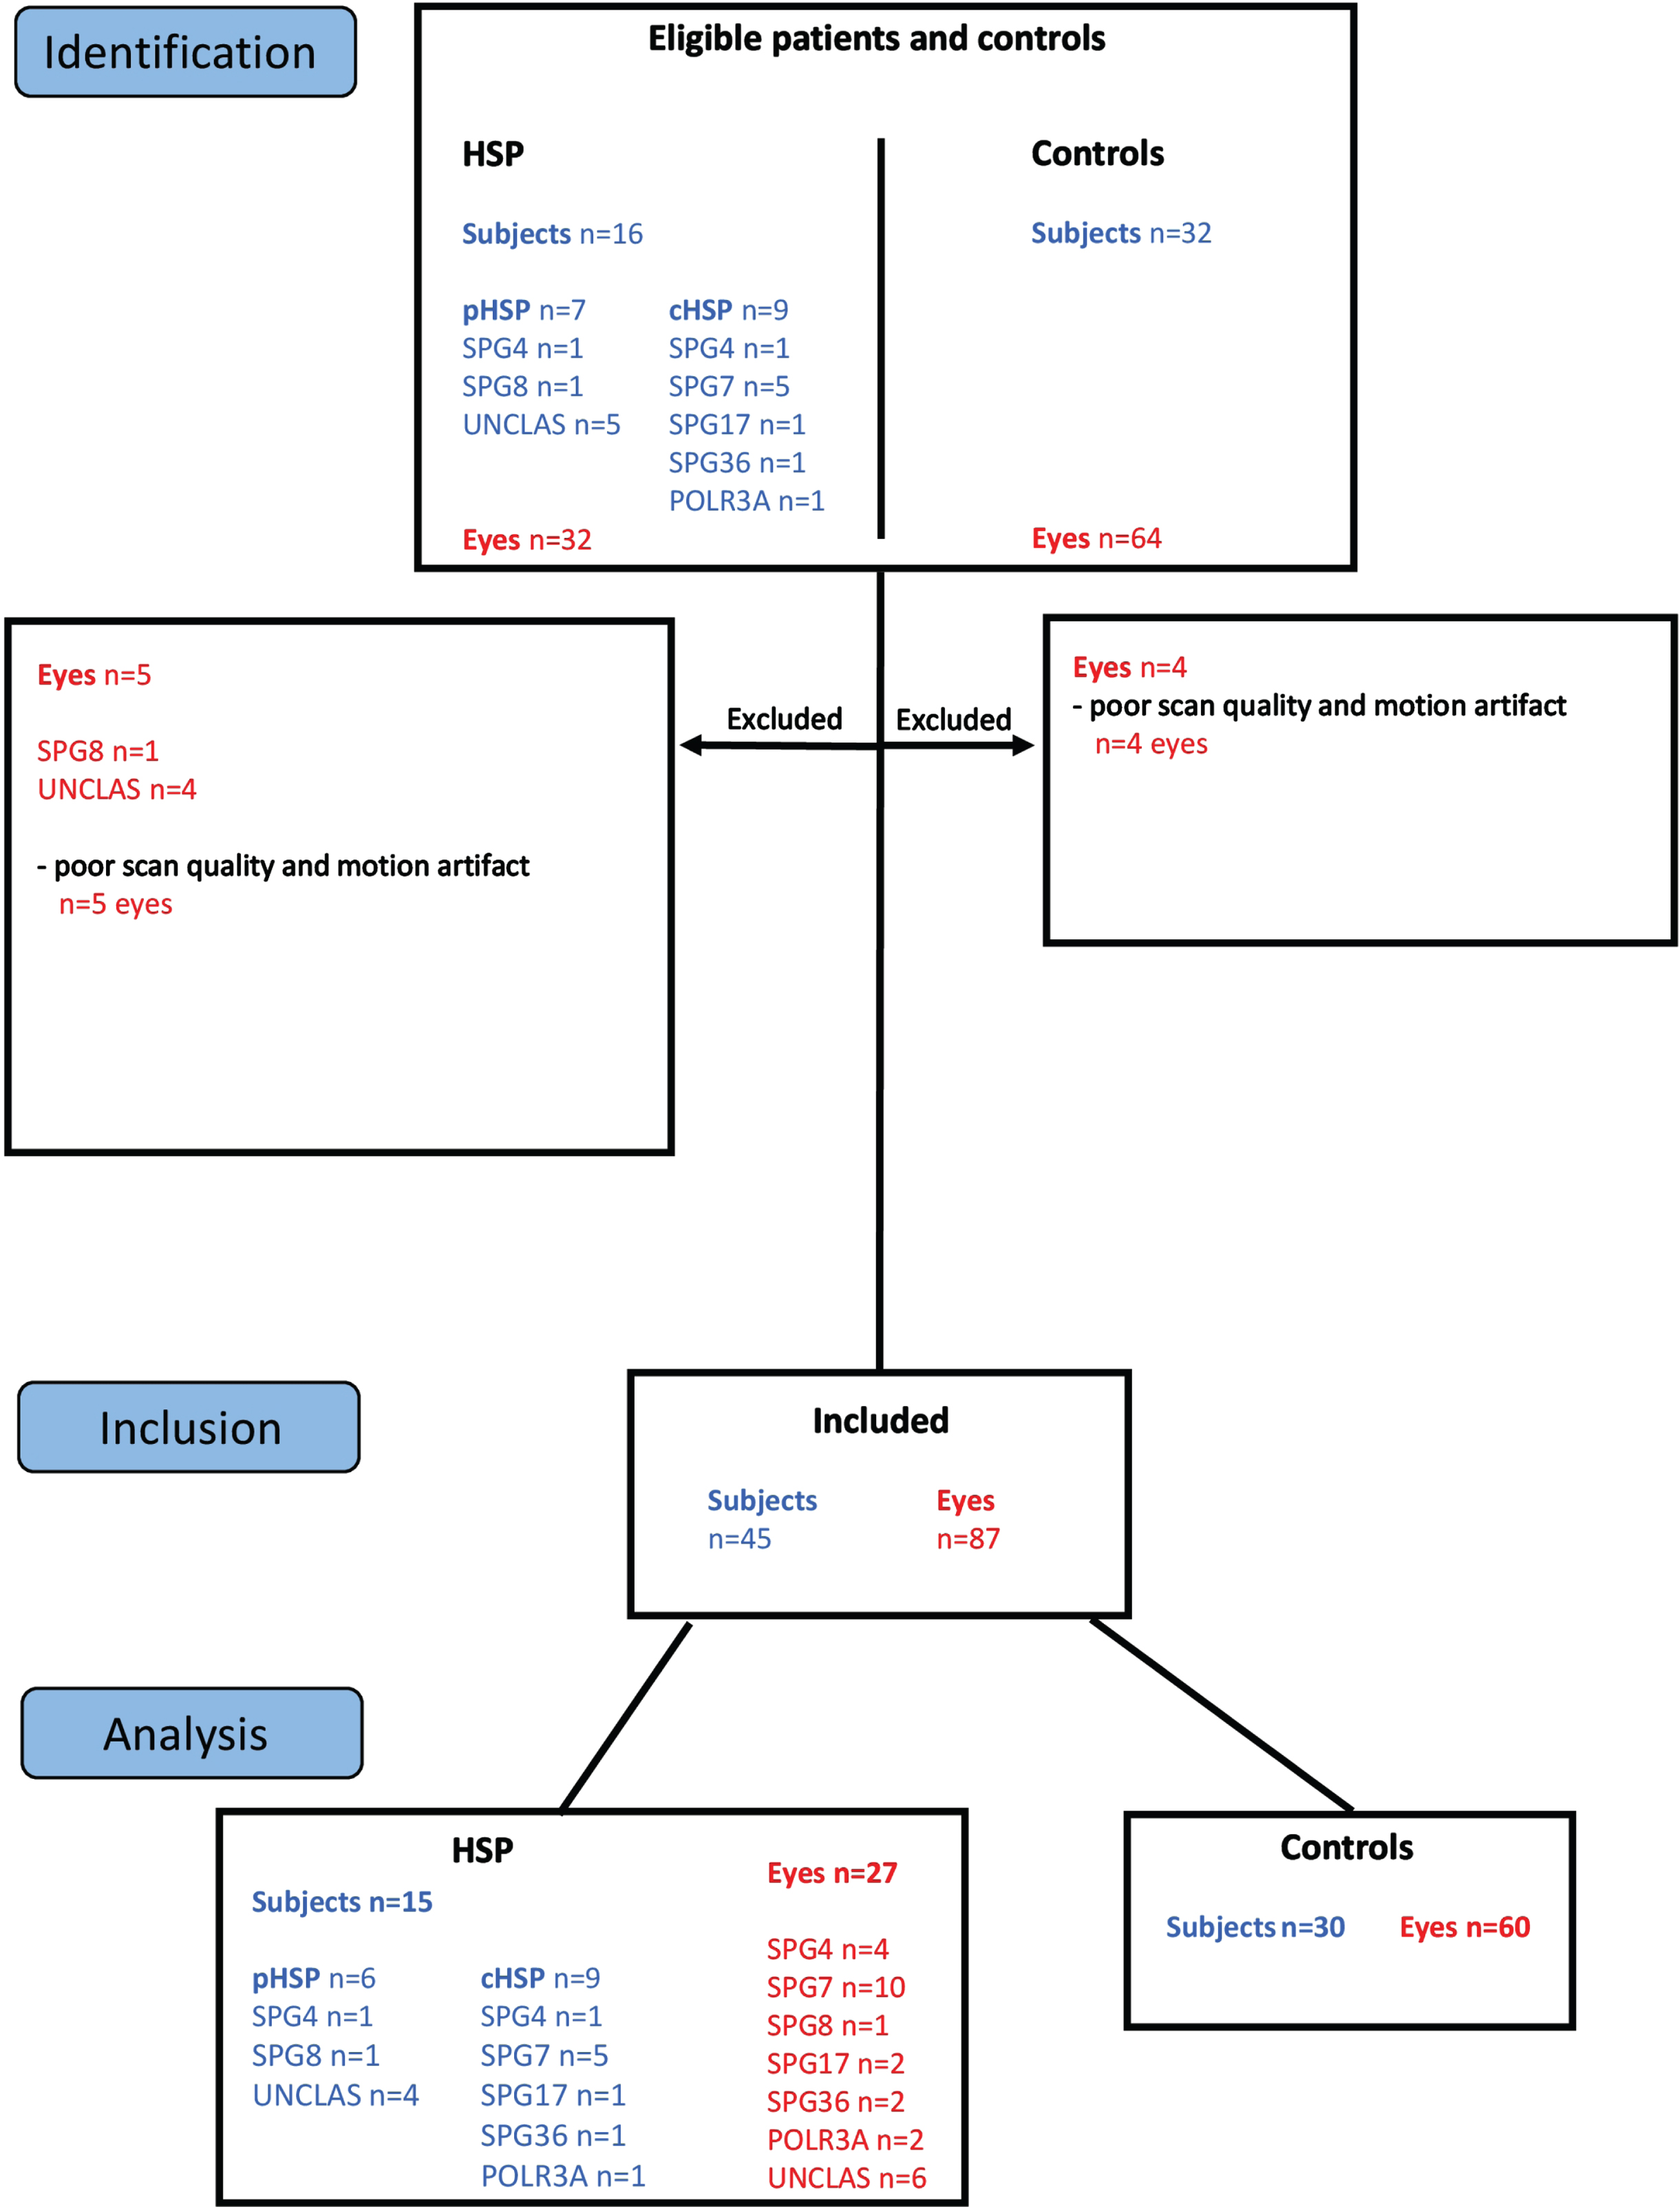 Study Flow Chart. Sixteen subjects diagnosed with HSP and 32 healthy controls were enrolled in the study. Five eyes of HSP patients and 4 eyes of control subjects were excluded from the study due to poor scan quality and motion artifacts. For analyses, 27 eyes from 15 included subjects diagnosed with HSP, and 60 eyes from 30 included healthy controls were used.